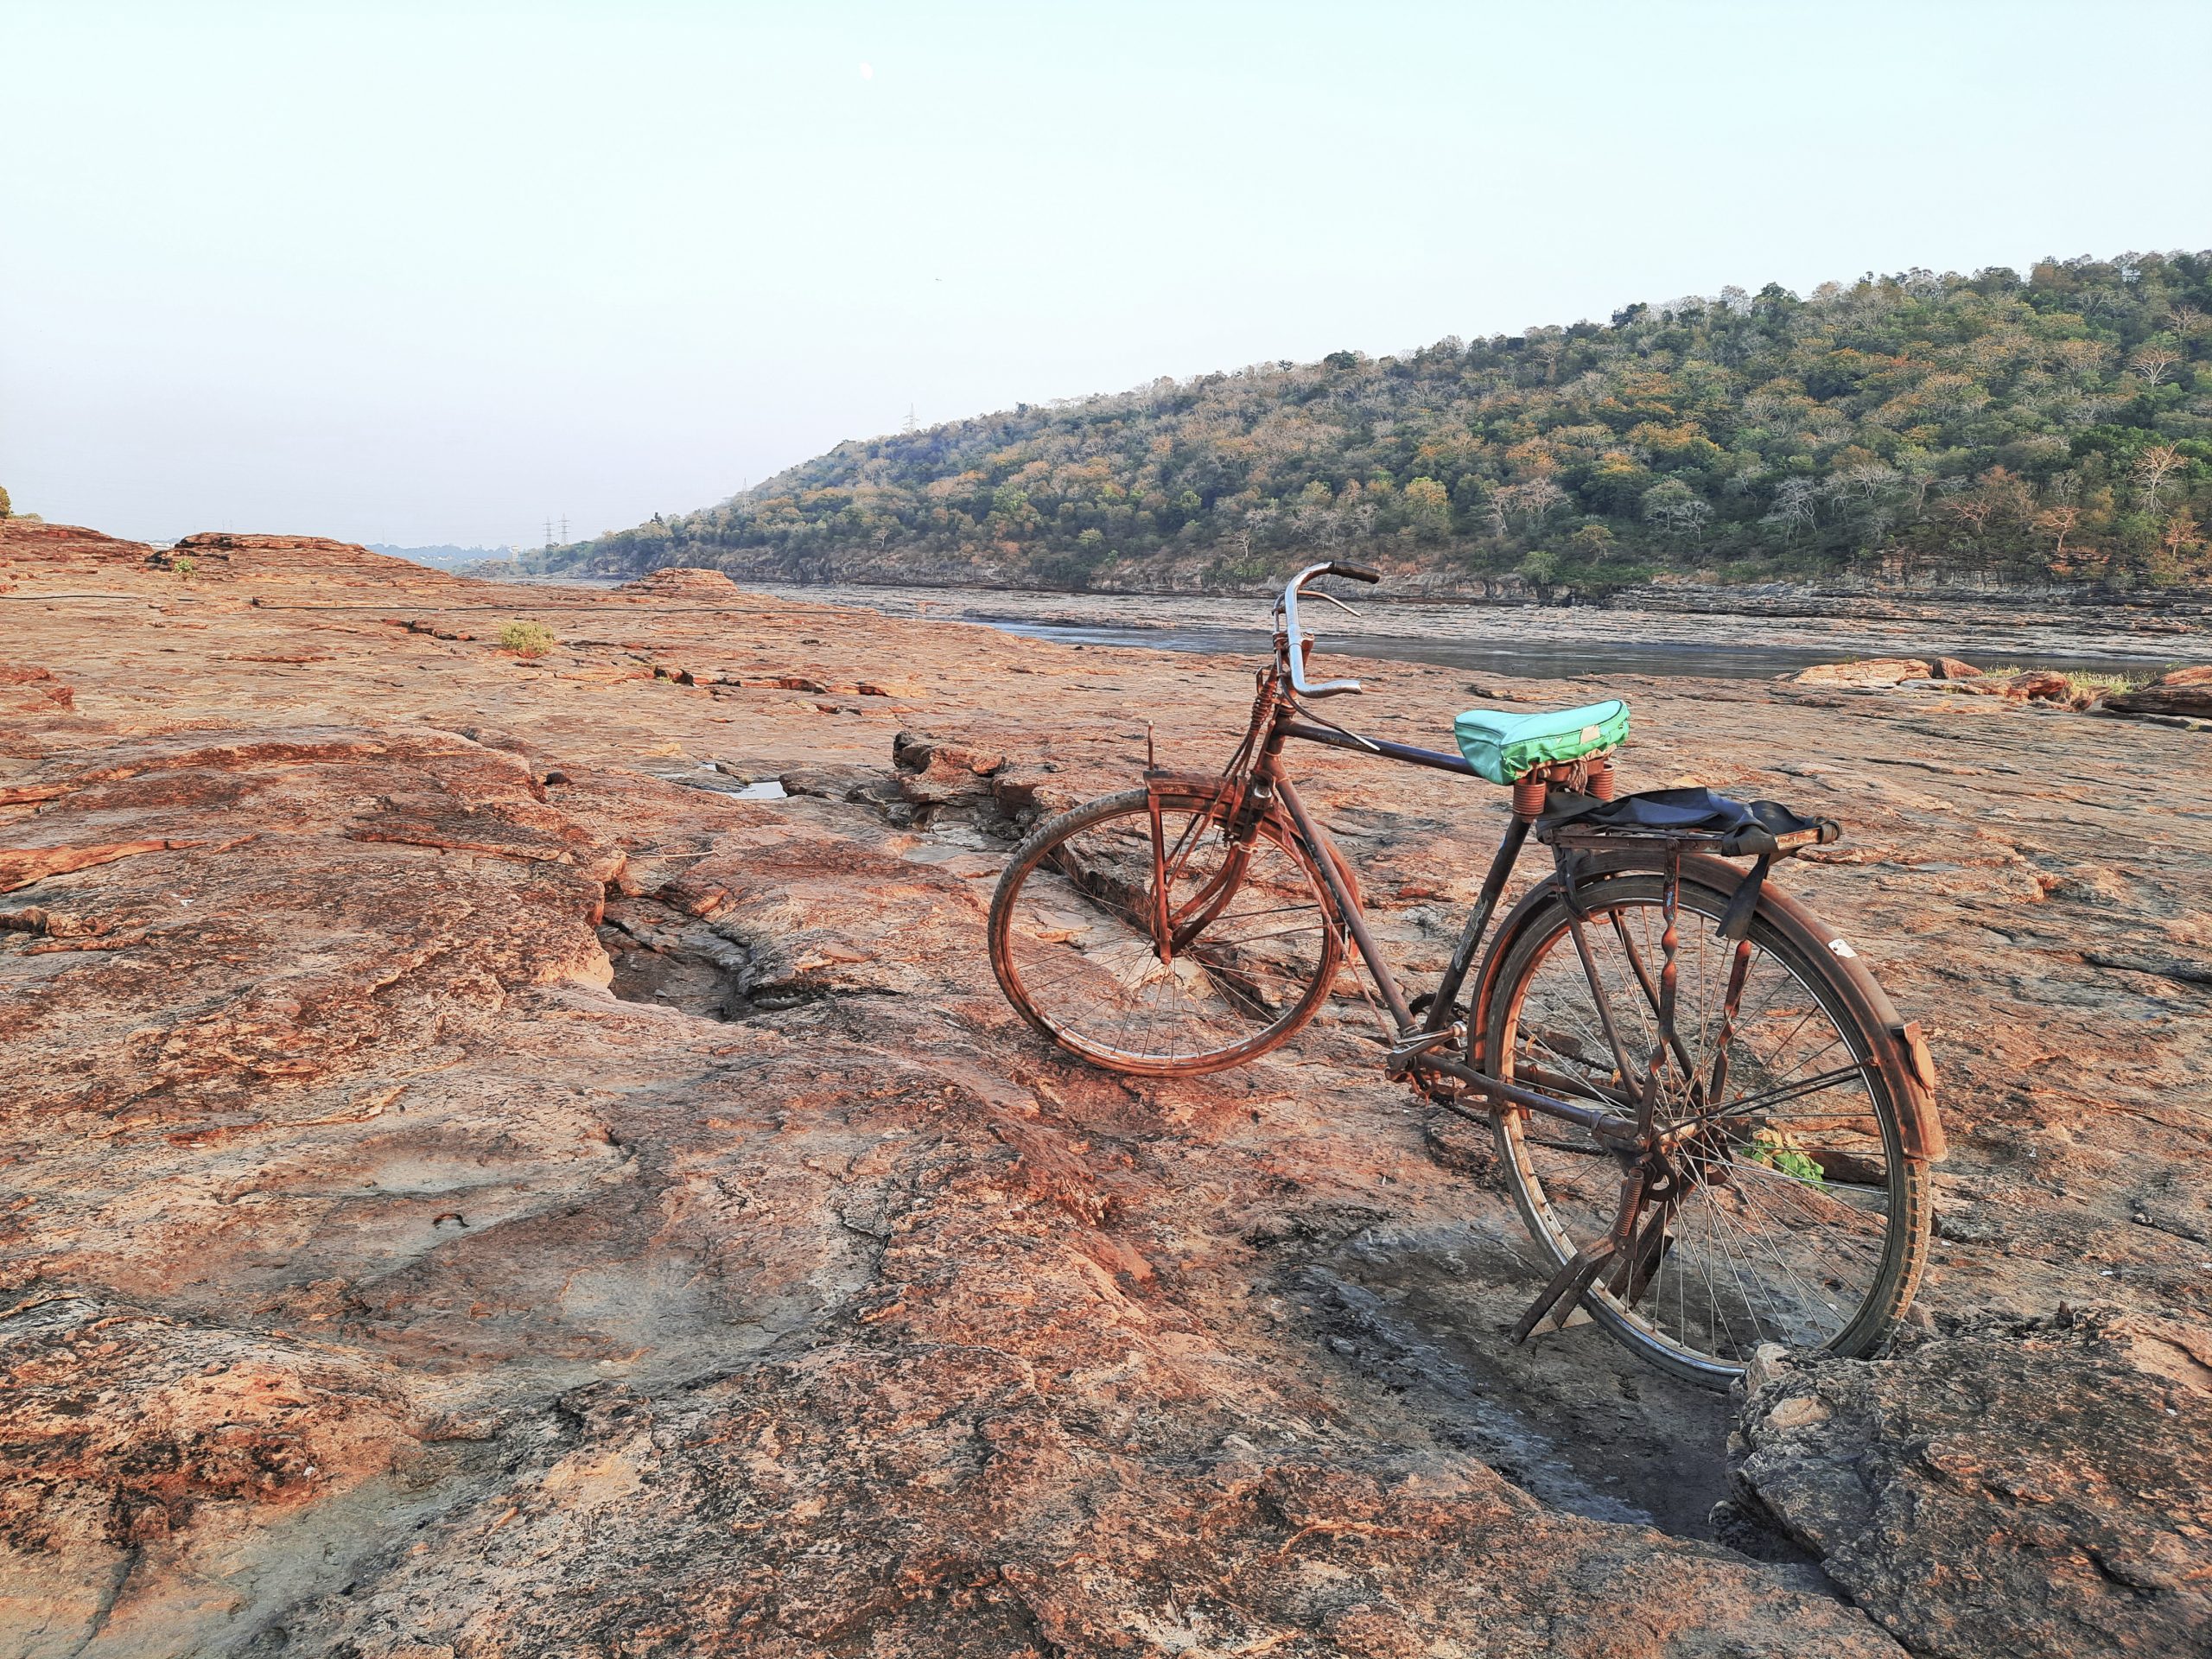 A bicycle on rocks